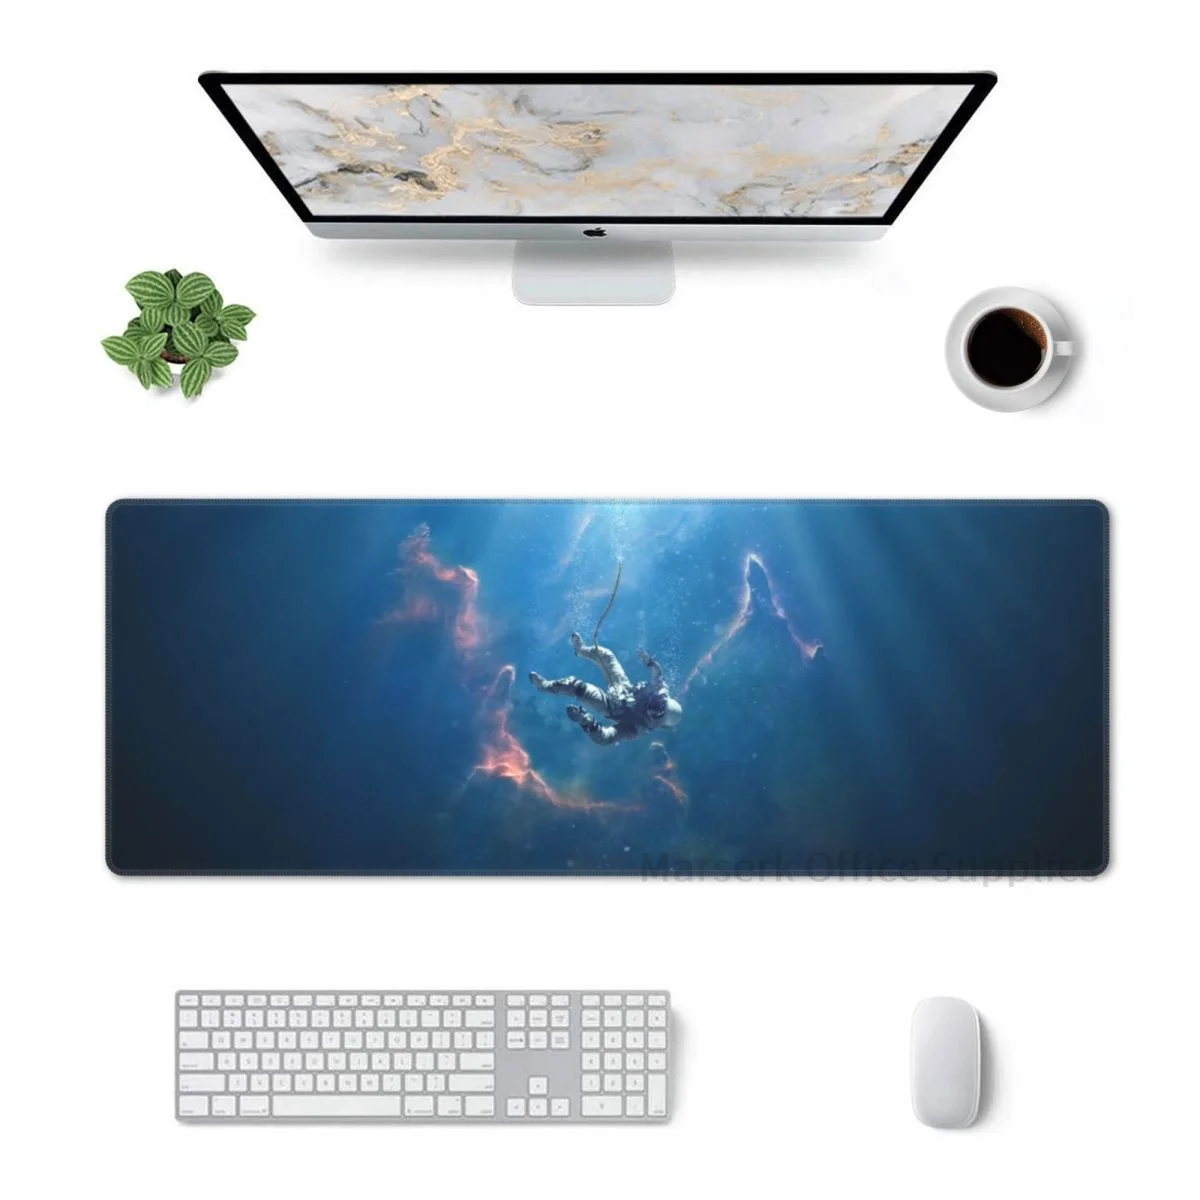 

Fall Into Ocean Large Mouse Pad Astronaut And Space Laptop Desk Keyboard Mat 30x80cm Gamers Decoracion Non-Slip Rubber Carpet